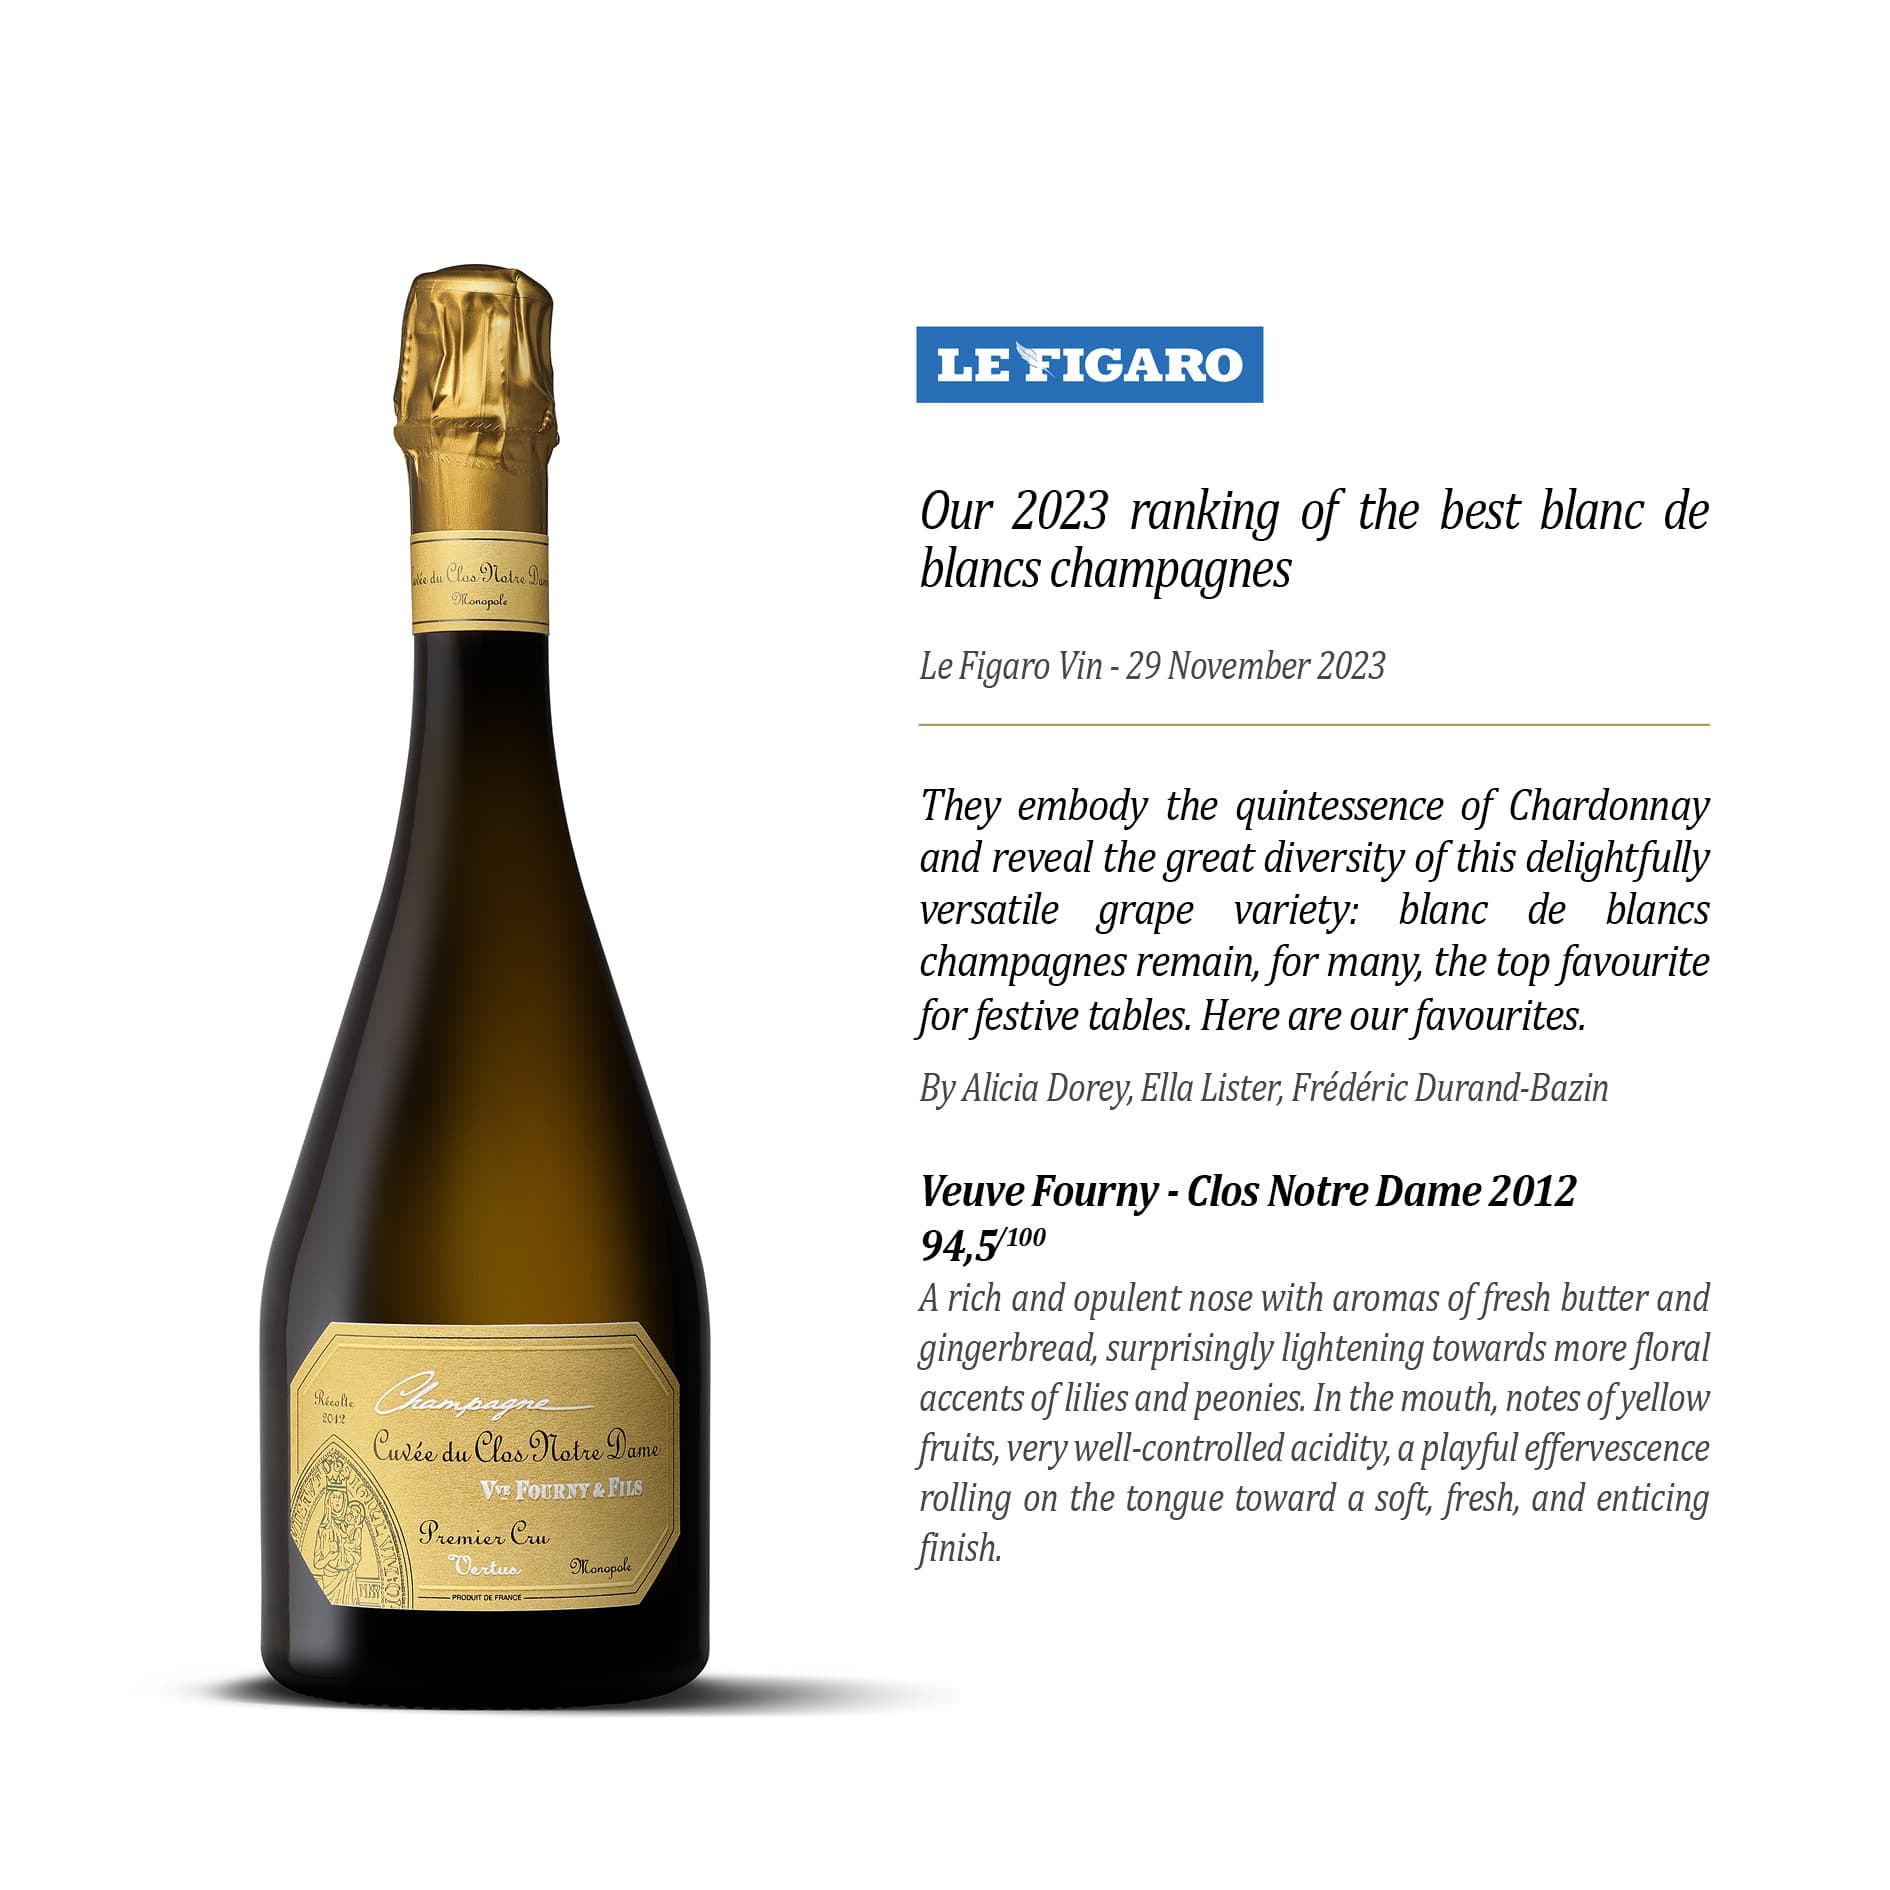 Our 2023 ranking of the best blanc de blancs champagnes